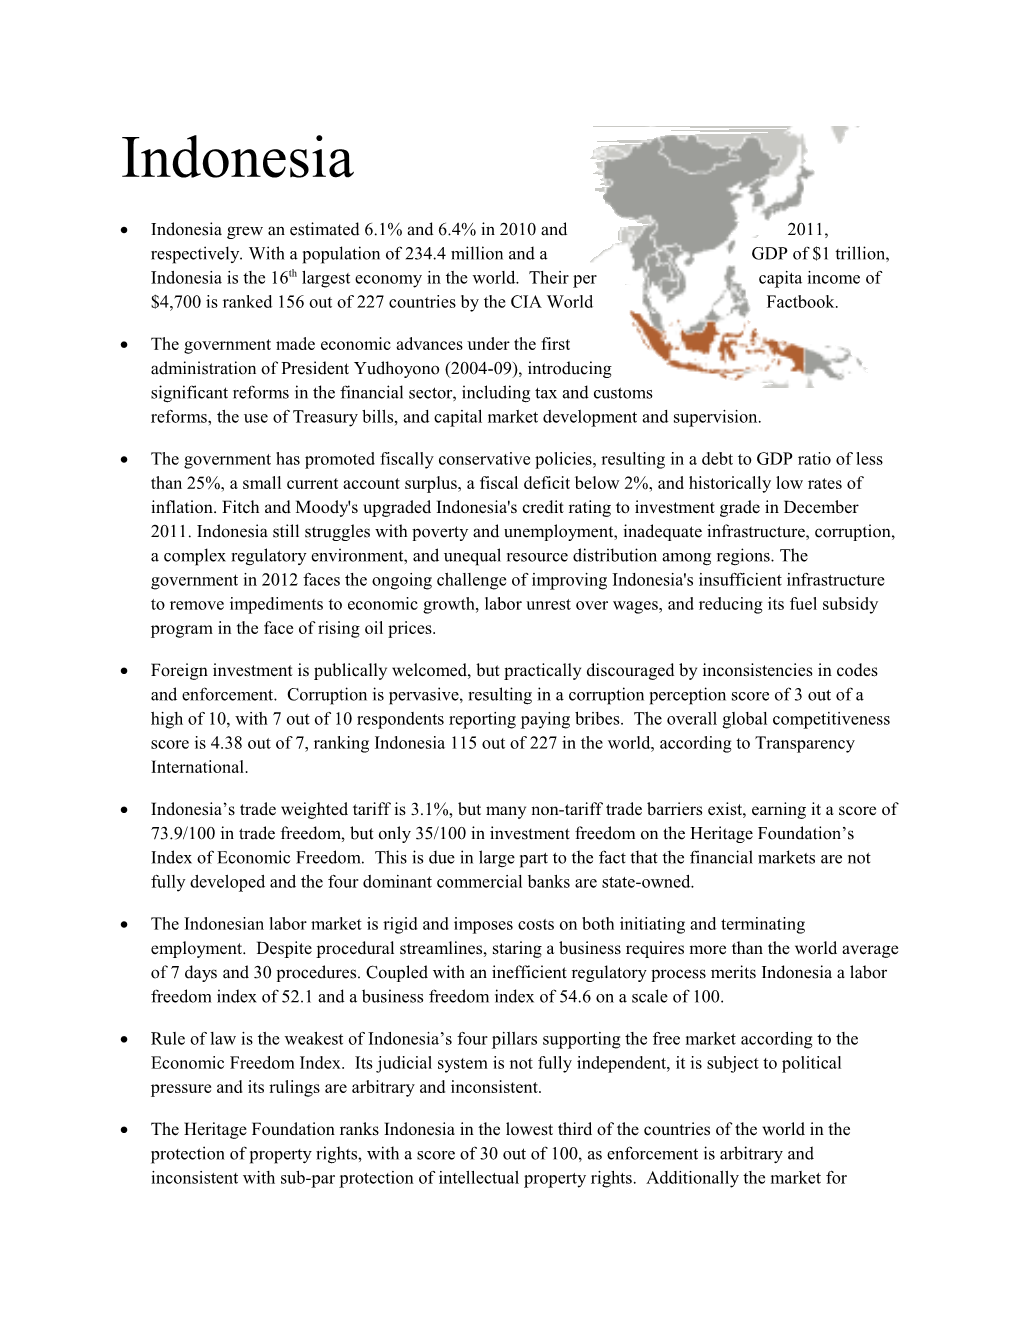 Indonesia Grew an Estimated 6.1% and 6.4% in 2010 and 2011, Respectively. with a Population